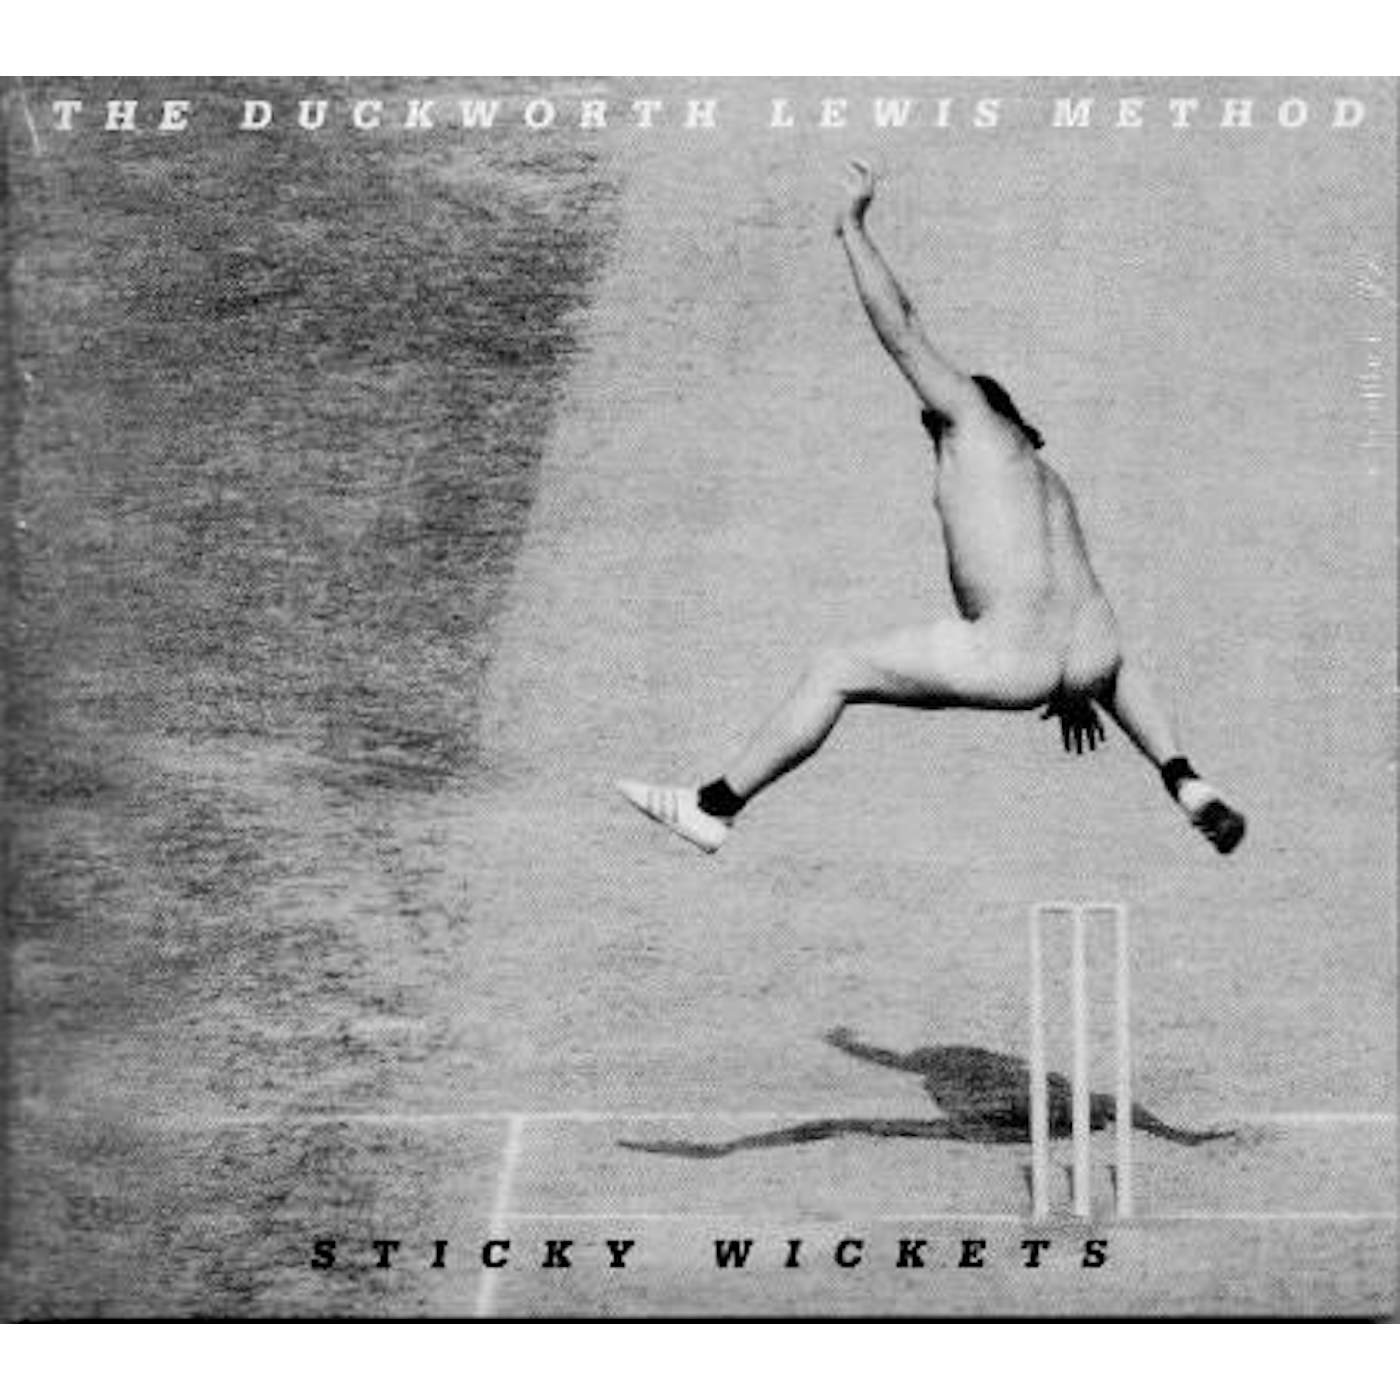 The Duckworth Lewis Method STICKY WICKETS CD